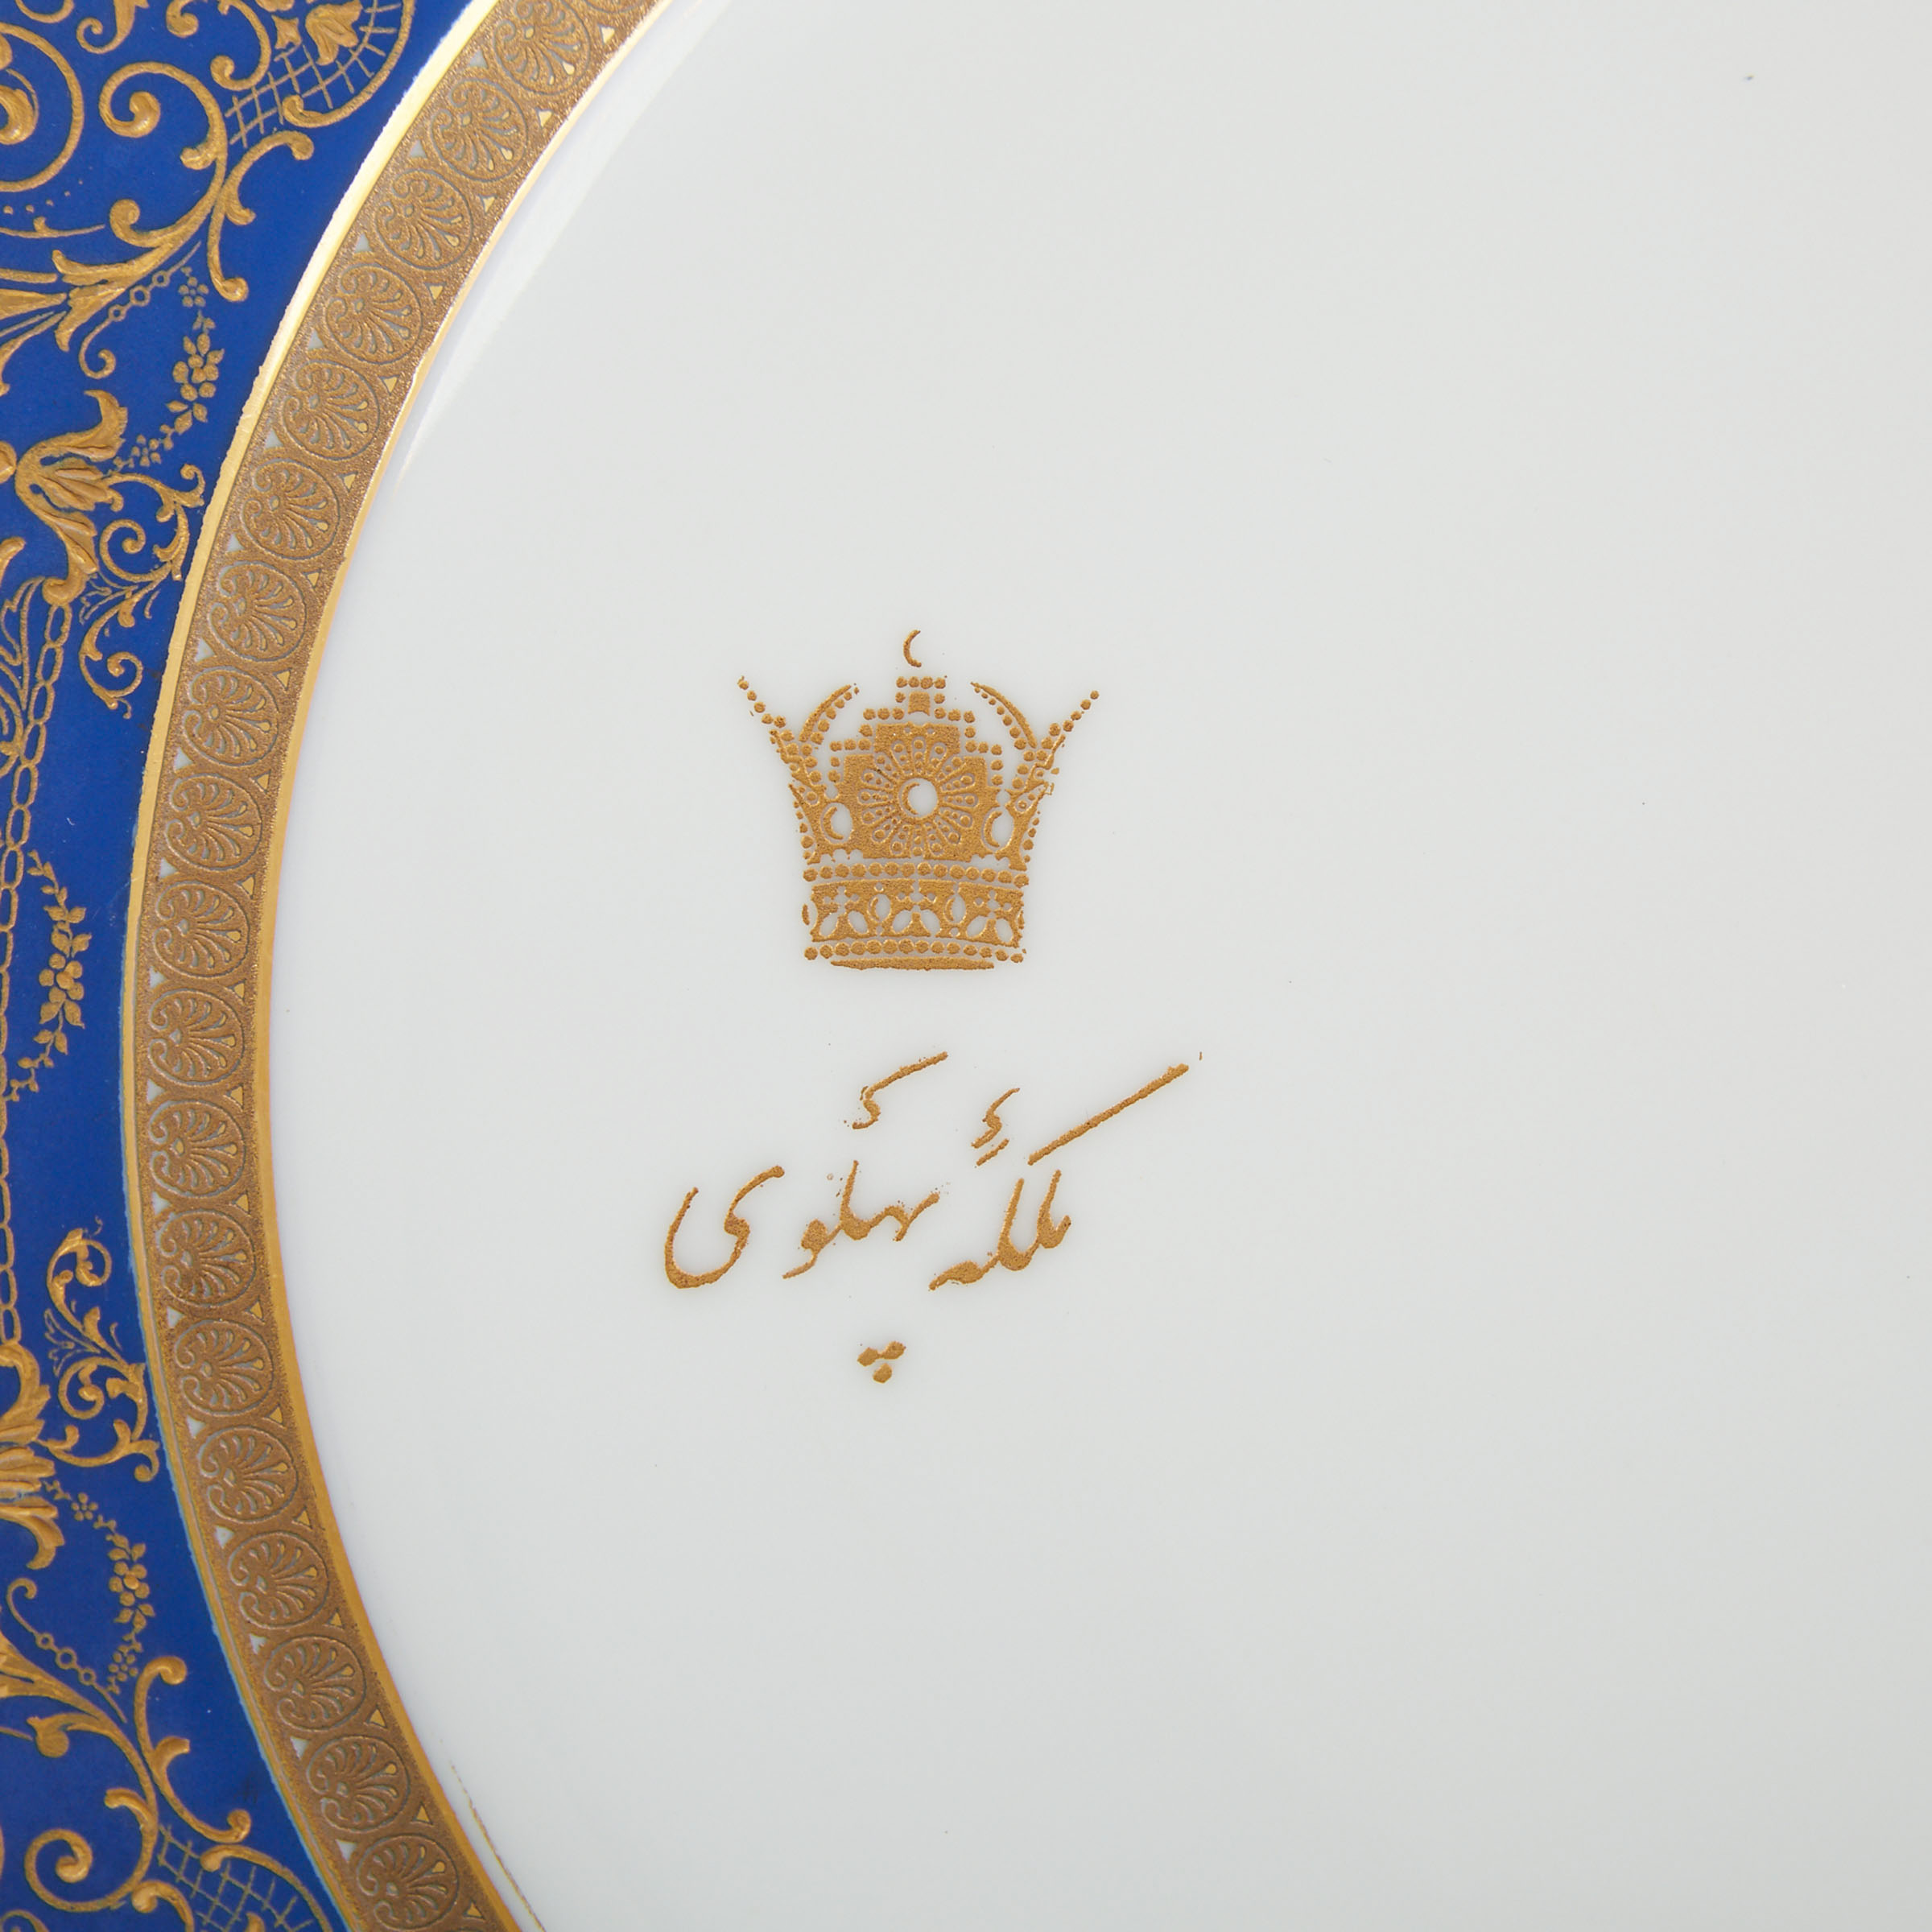 Rosenthal Armorial Service Plate for the Shah of Iran, Mohammad Reza Pahlavi, mid-20th century